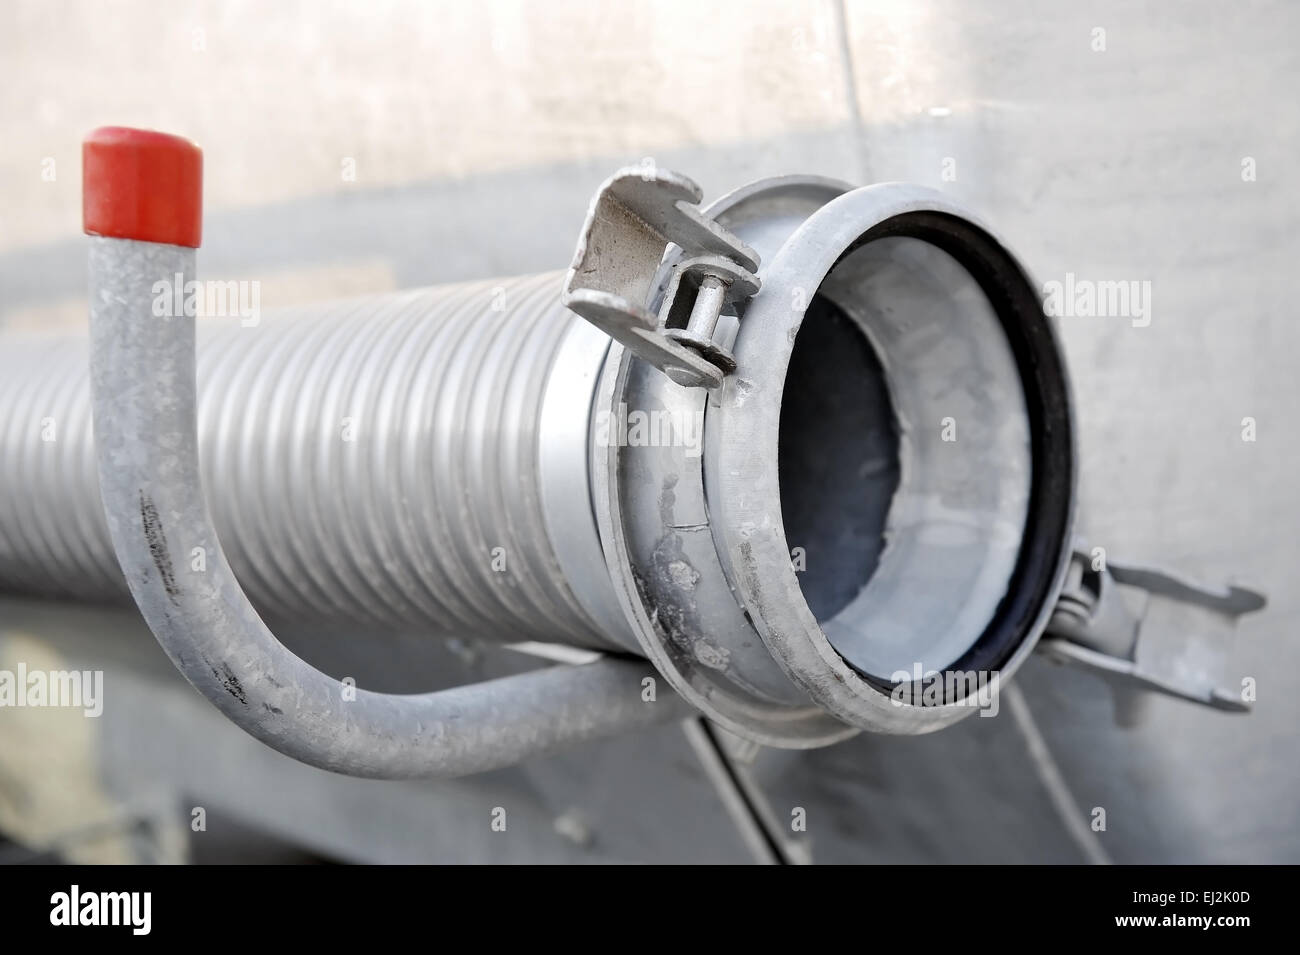 Industrial metal hose from a cistern reservoir Stock Photo